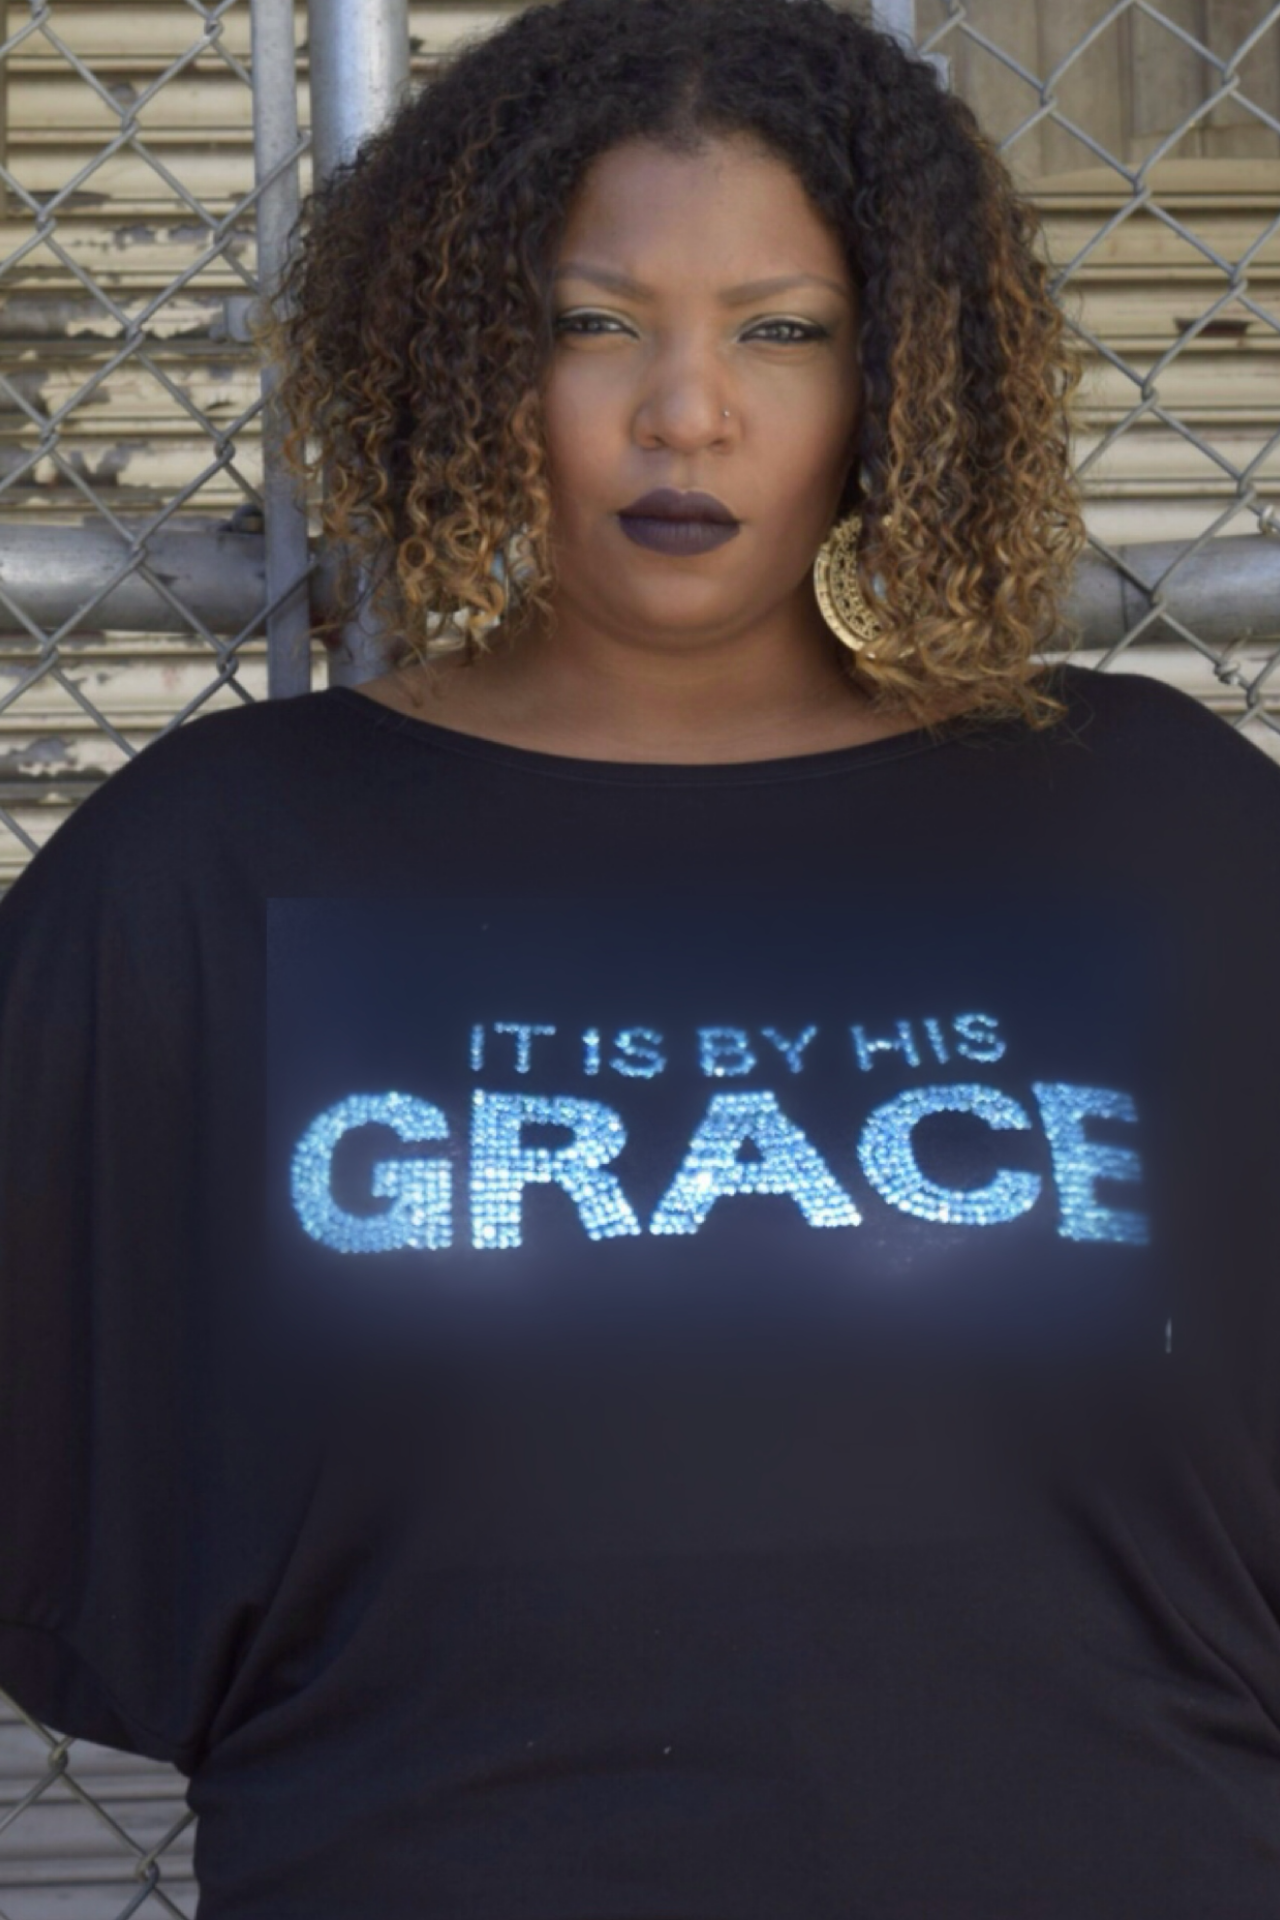 "It Is By His Grace" Fundraising Tee